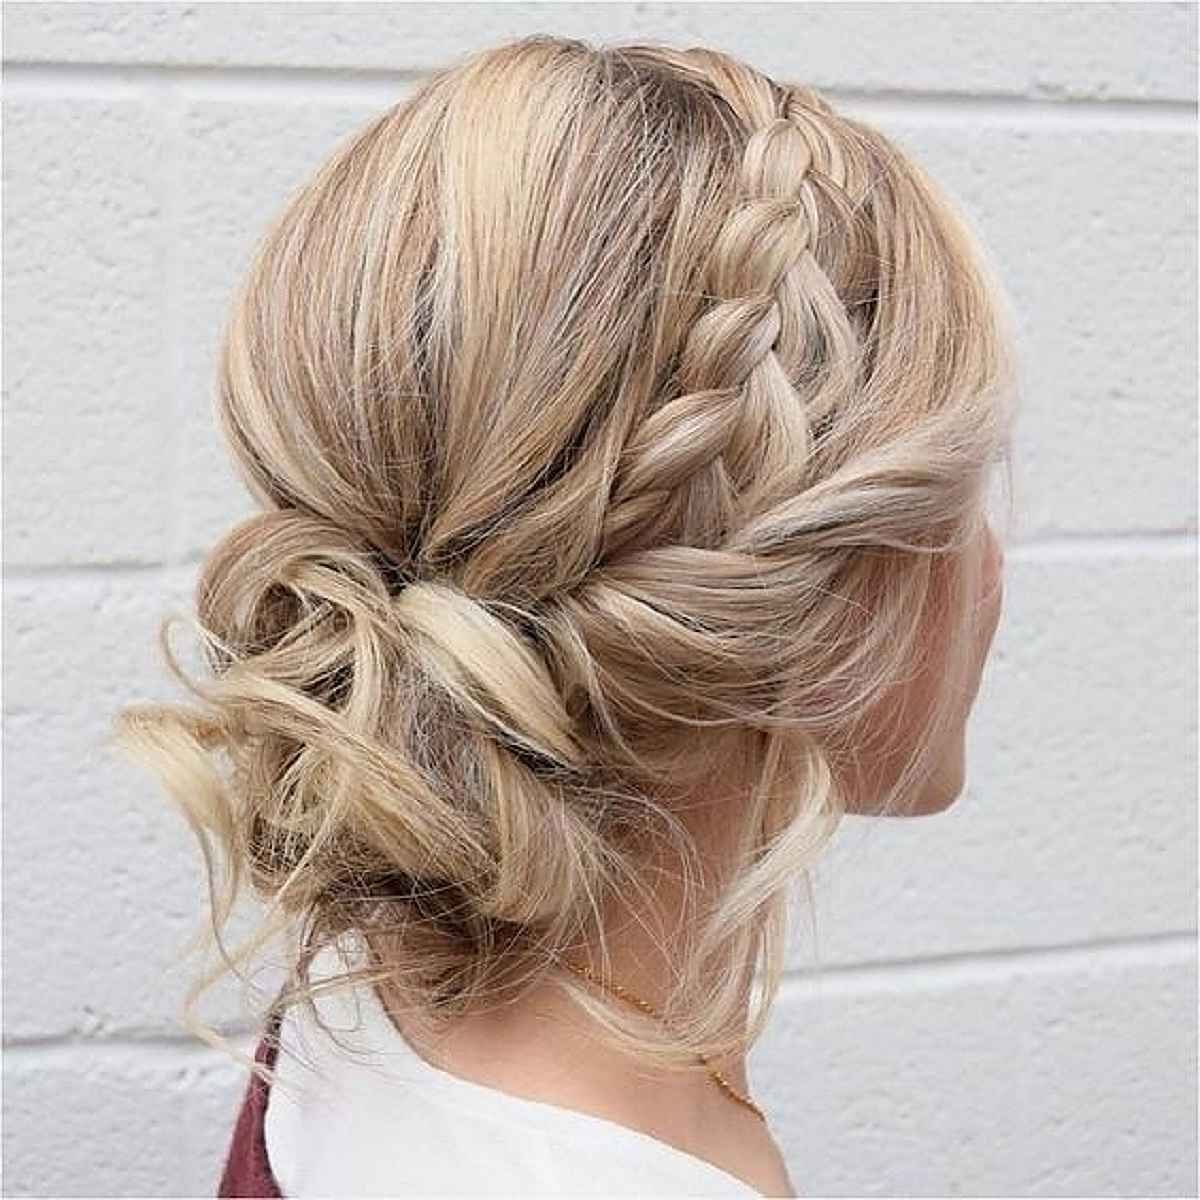 20 Romantic Bun Hairstyles For Prom That Are Easy To Do Regarding Best And Newest Undone Side Braid And Bun Upstyle (Gallery 12 of 15)